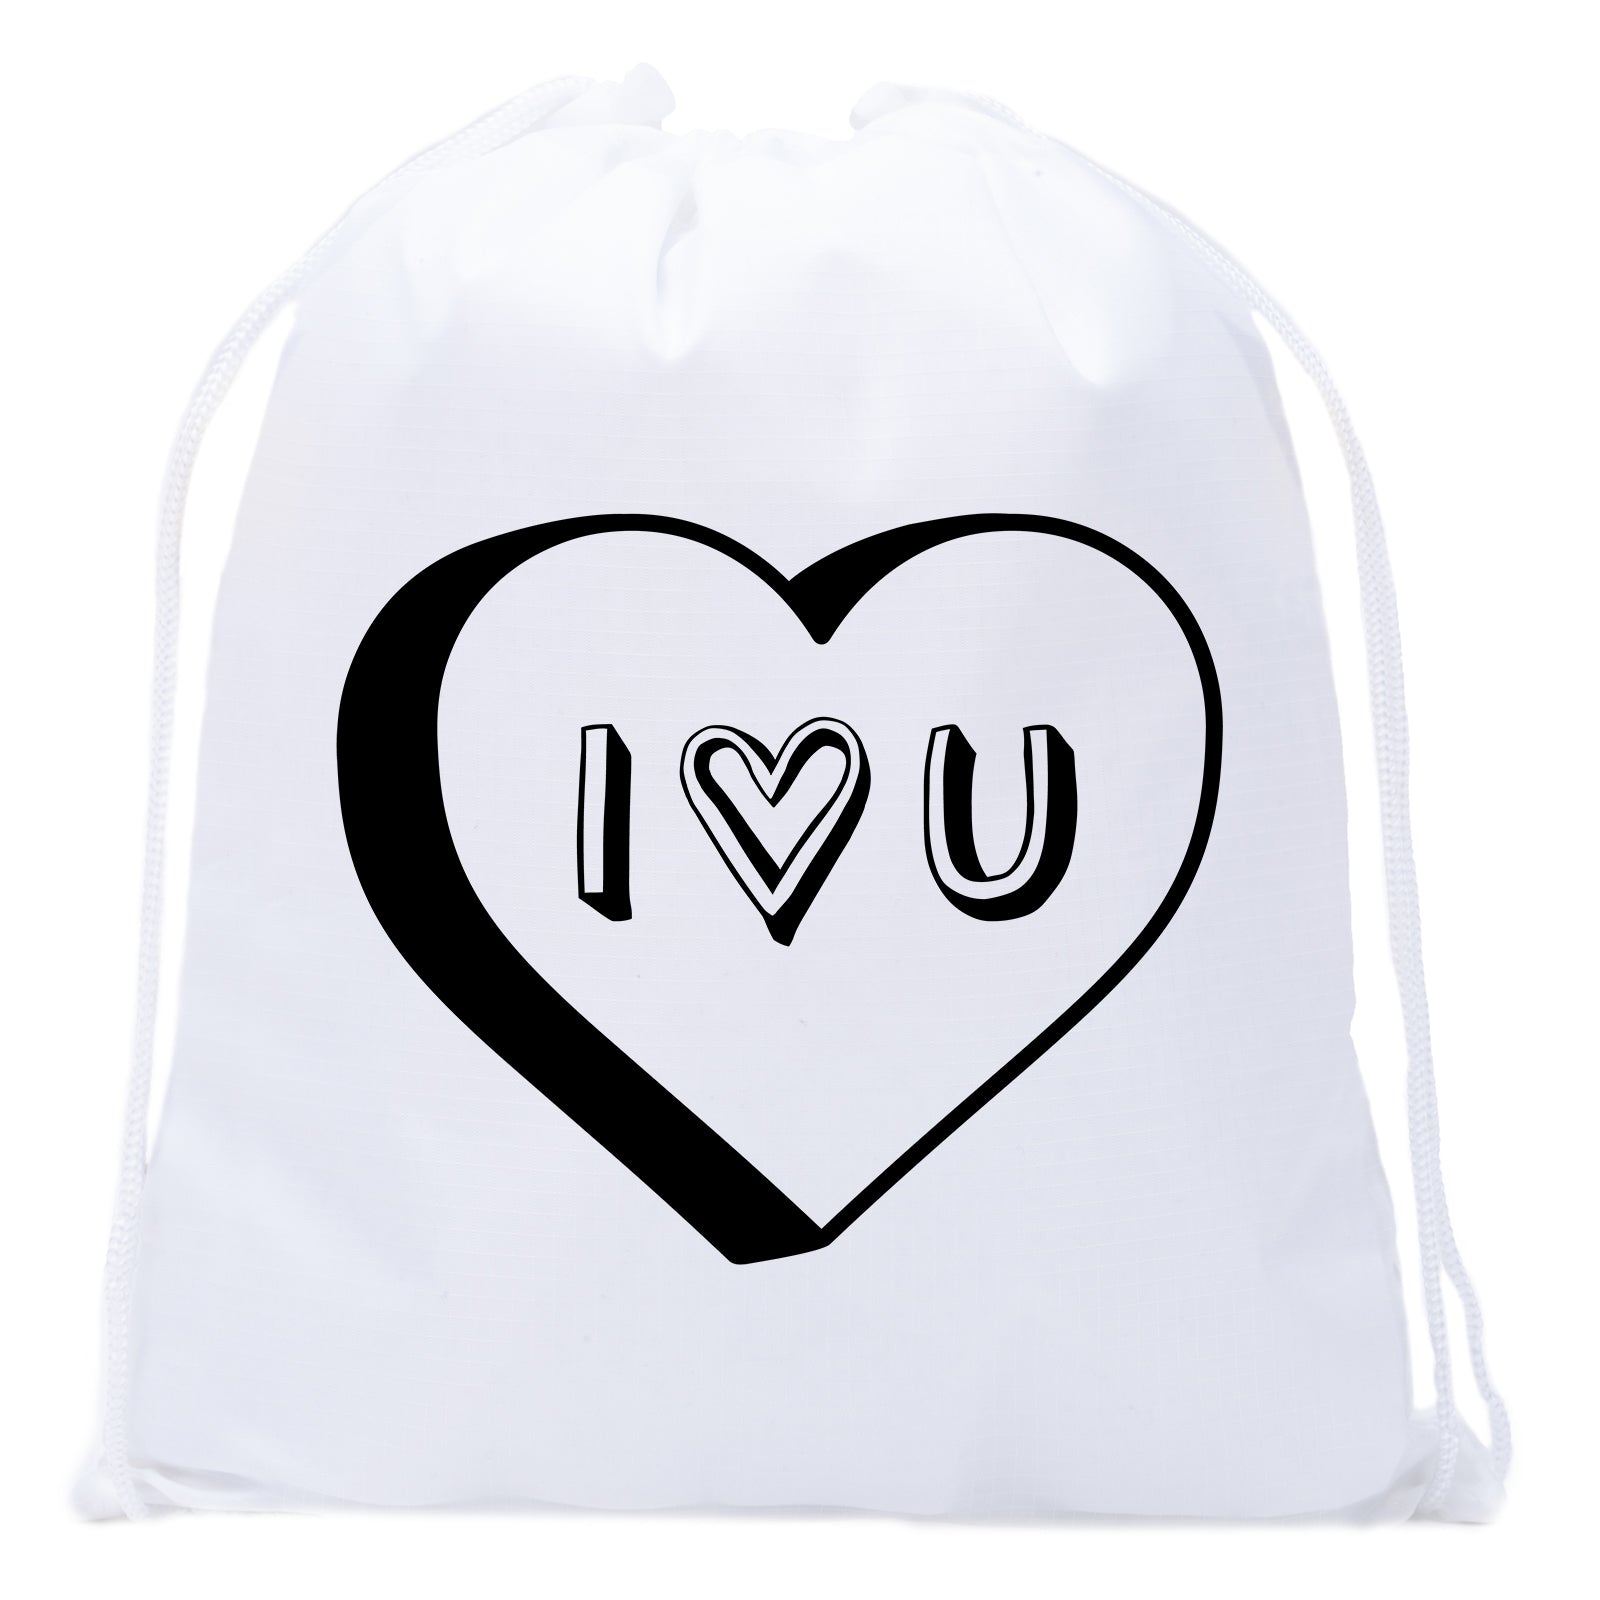 Accessory - Valentine's Day Bags, Mini Drawstring Cinch Backpacks, Valentines Day Gift Bags - I Heart U